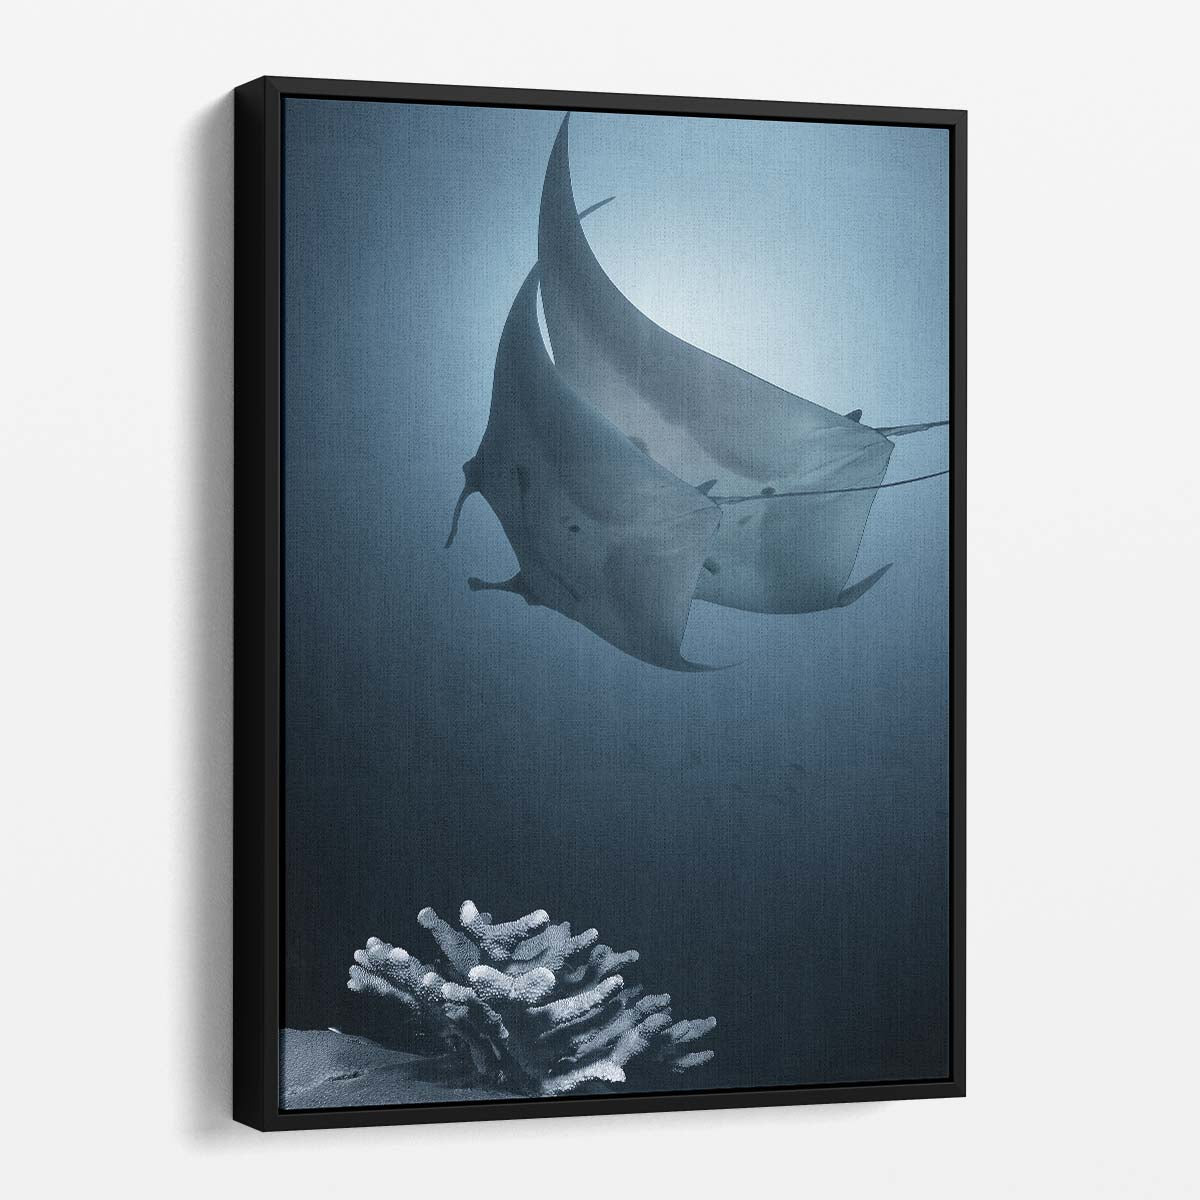 Romantic Manta Ray Dance, Underwater Photography, Similan Thailand by Luxuriance Designs, made in USA